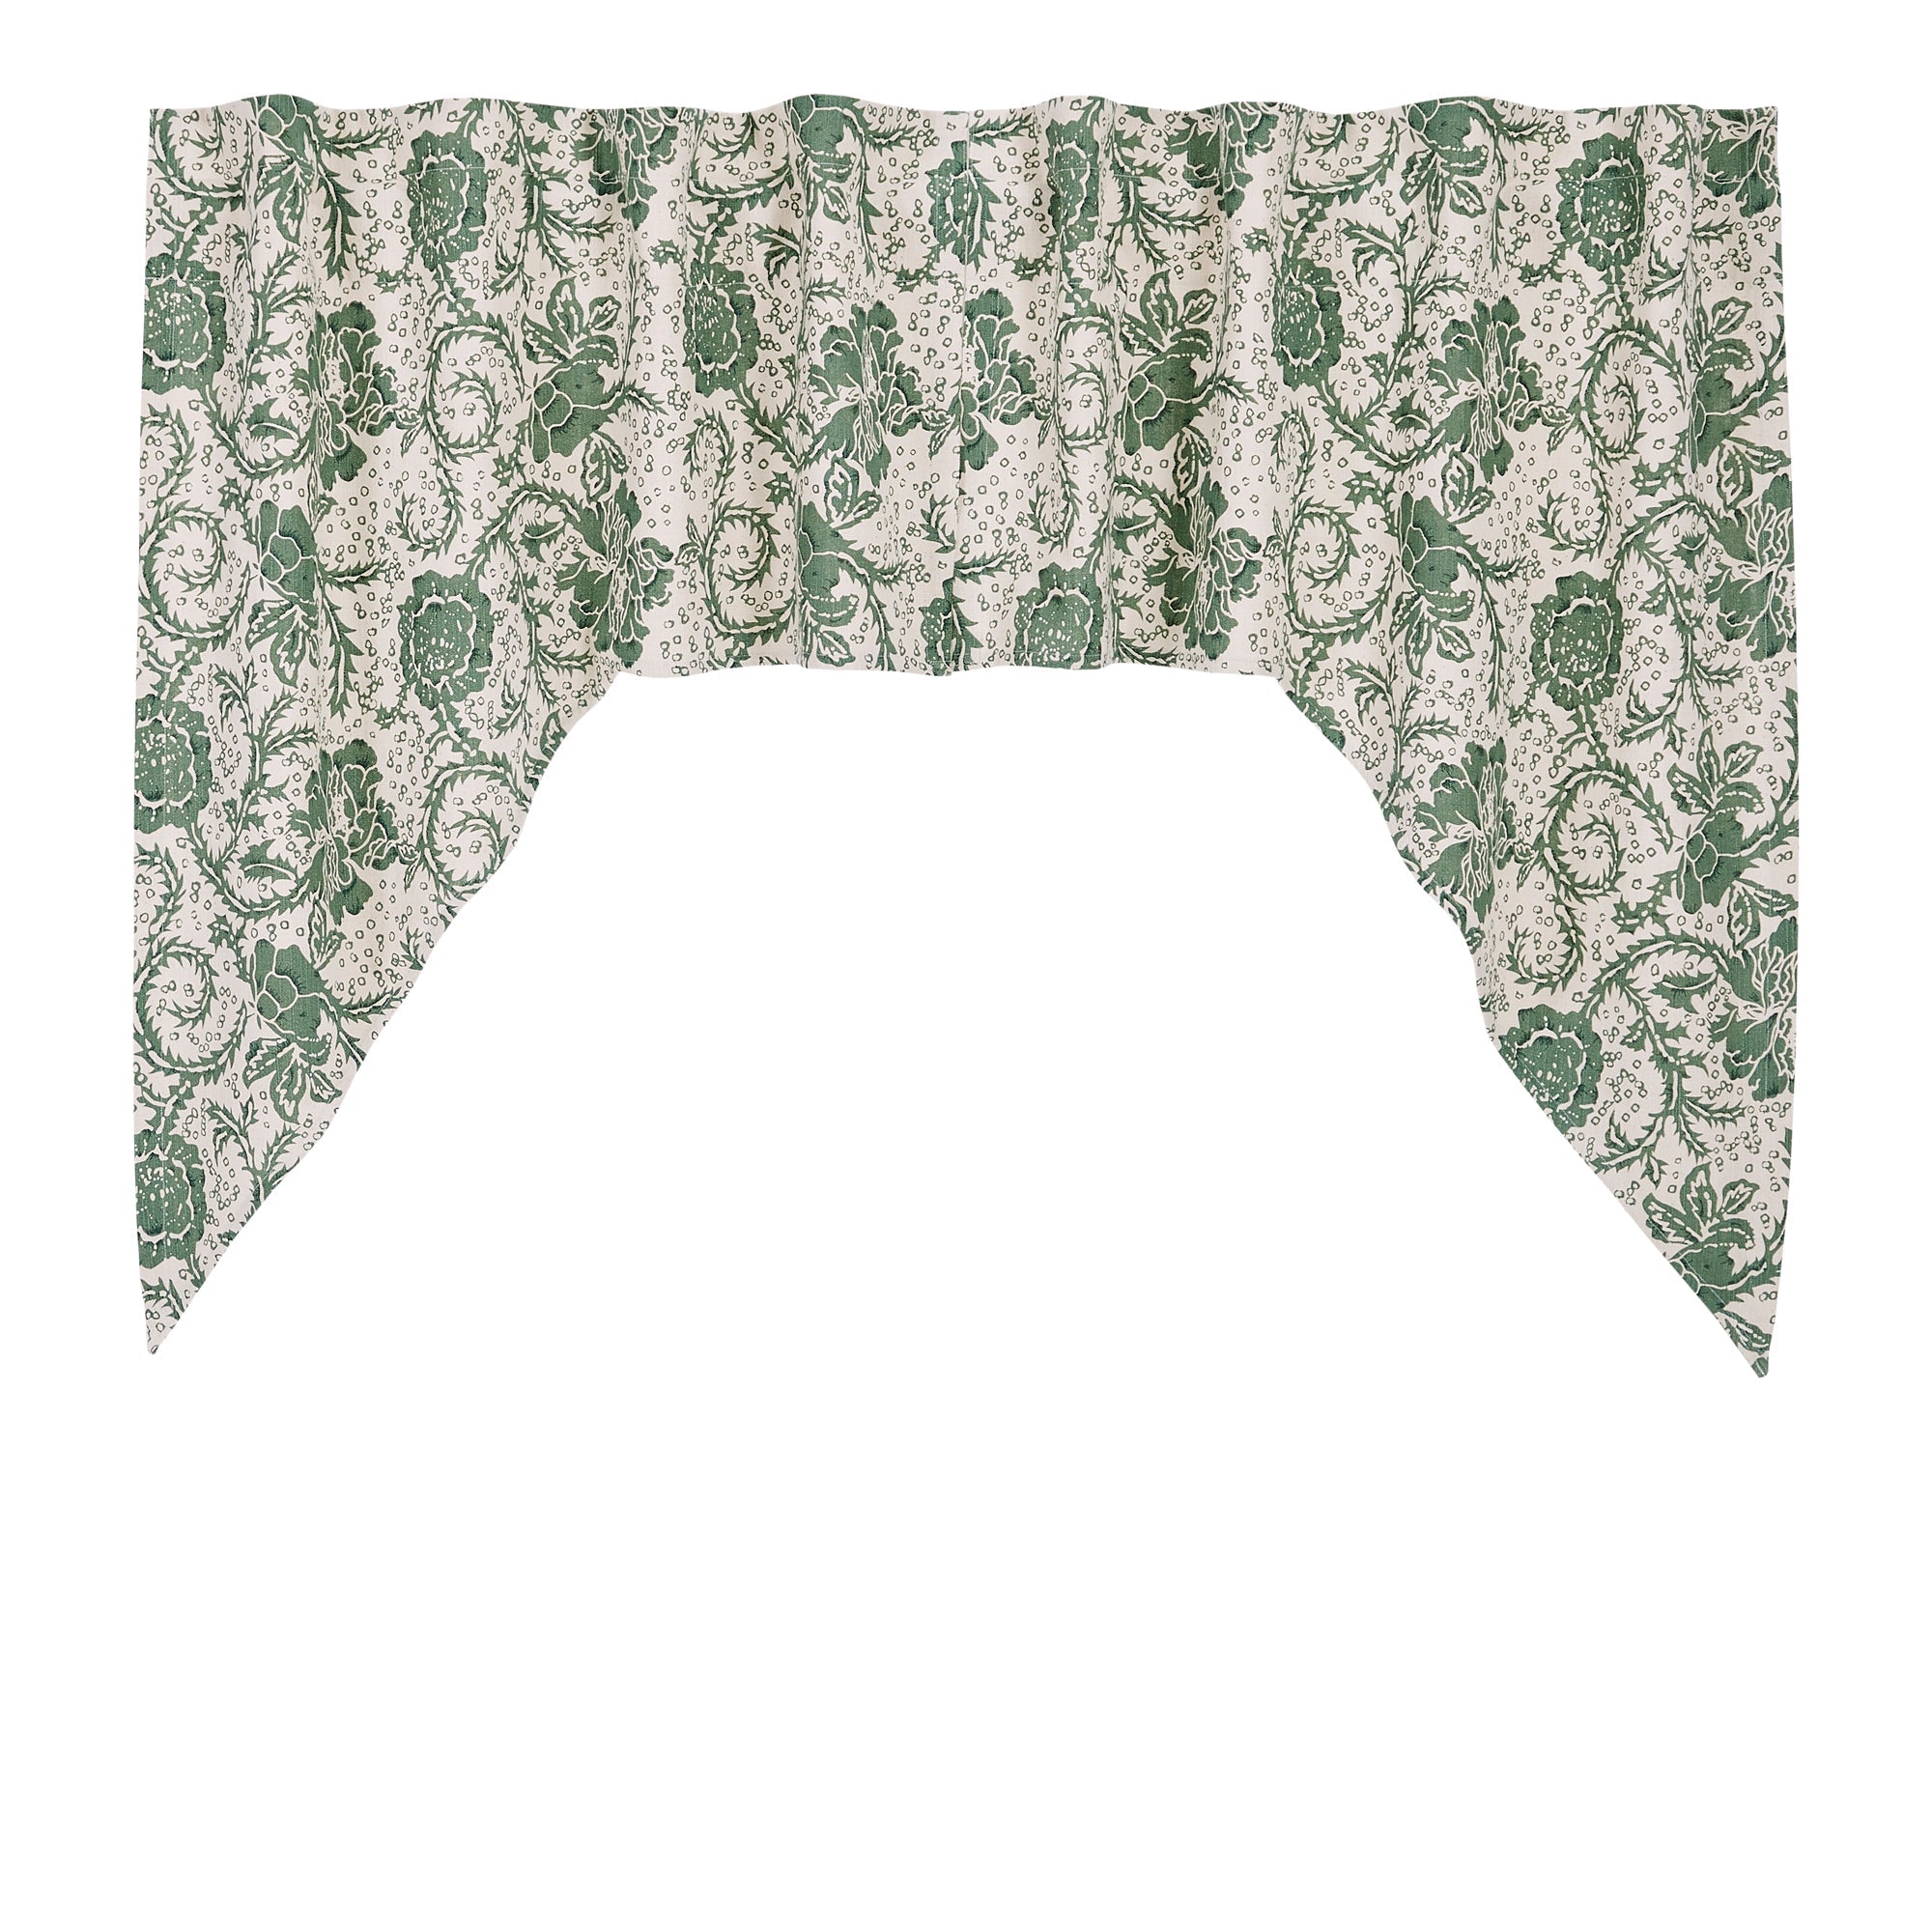 Dorset Green Floral Swag Curtain Set of 2 36x36x16 VHC Brands